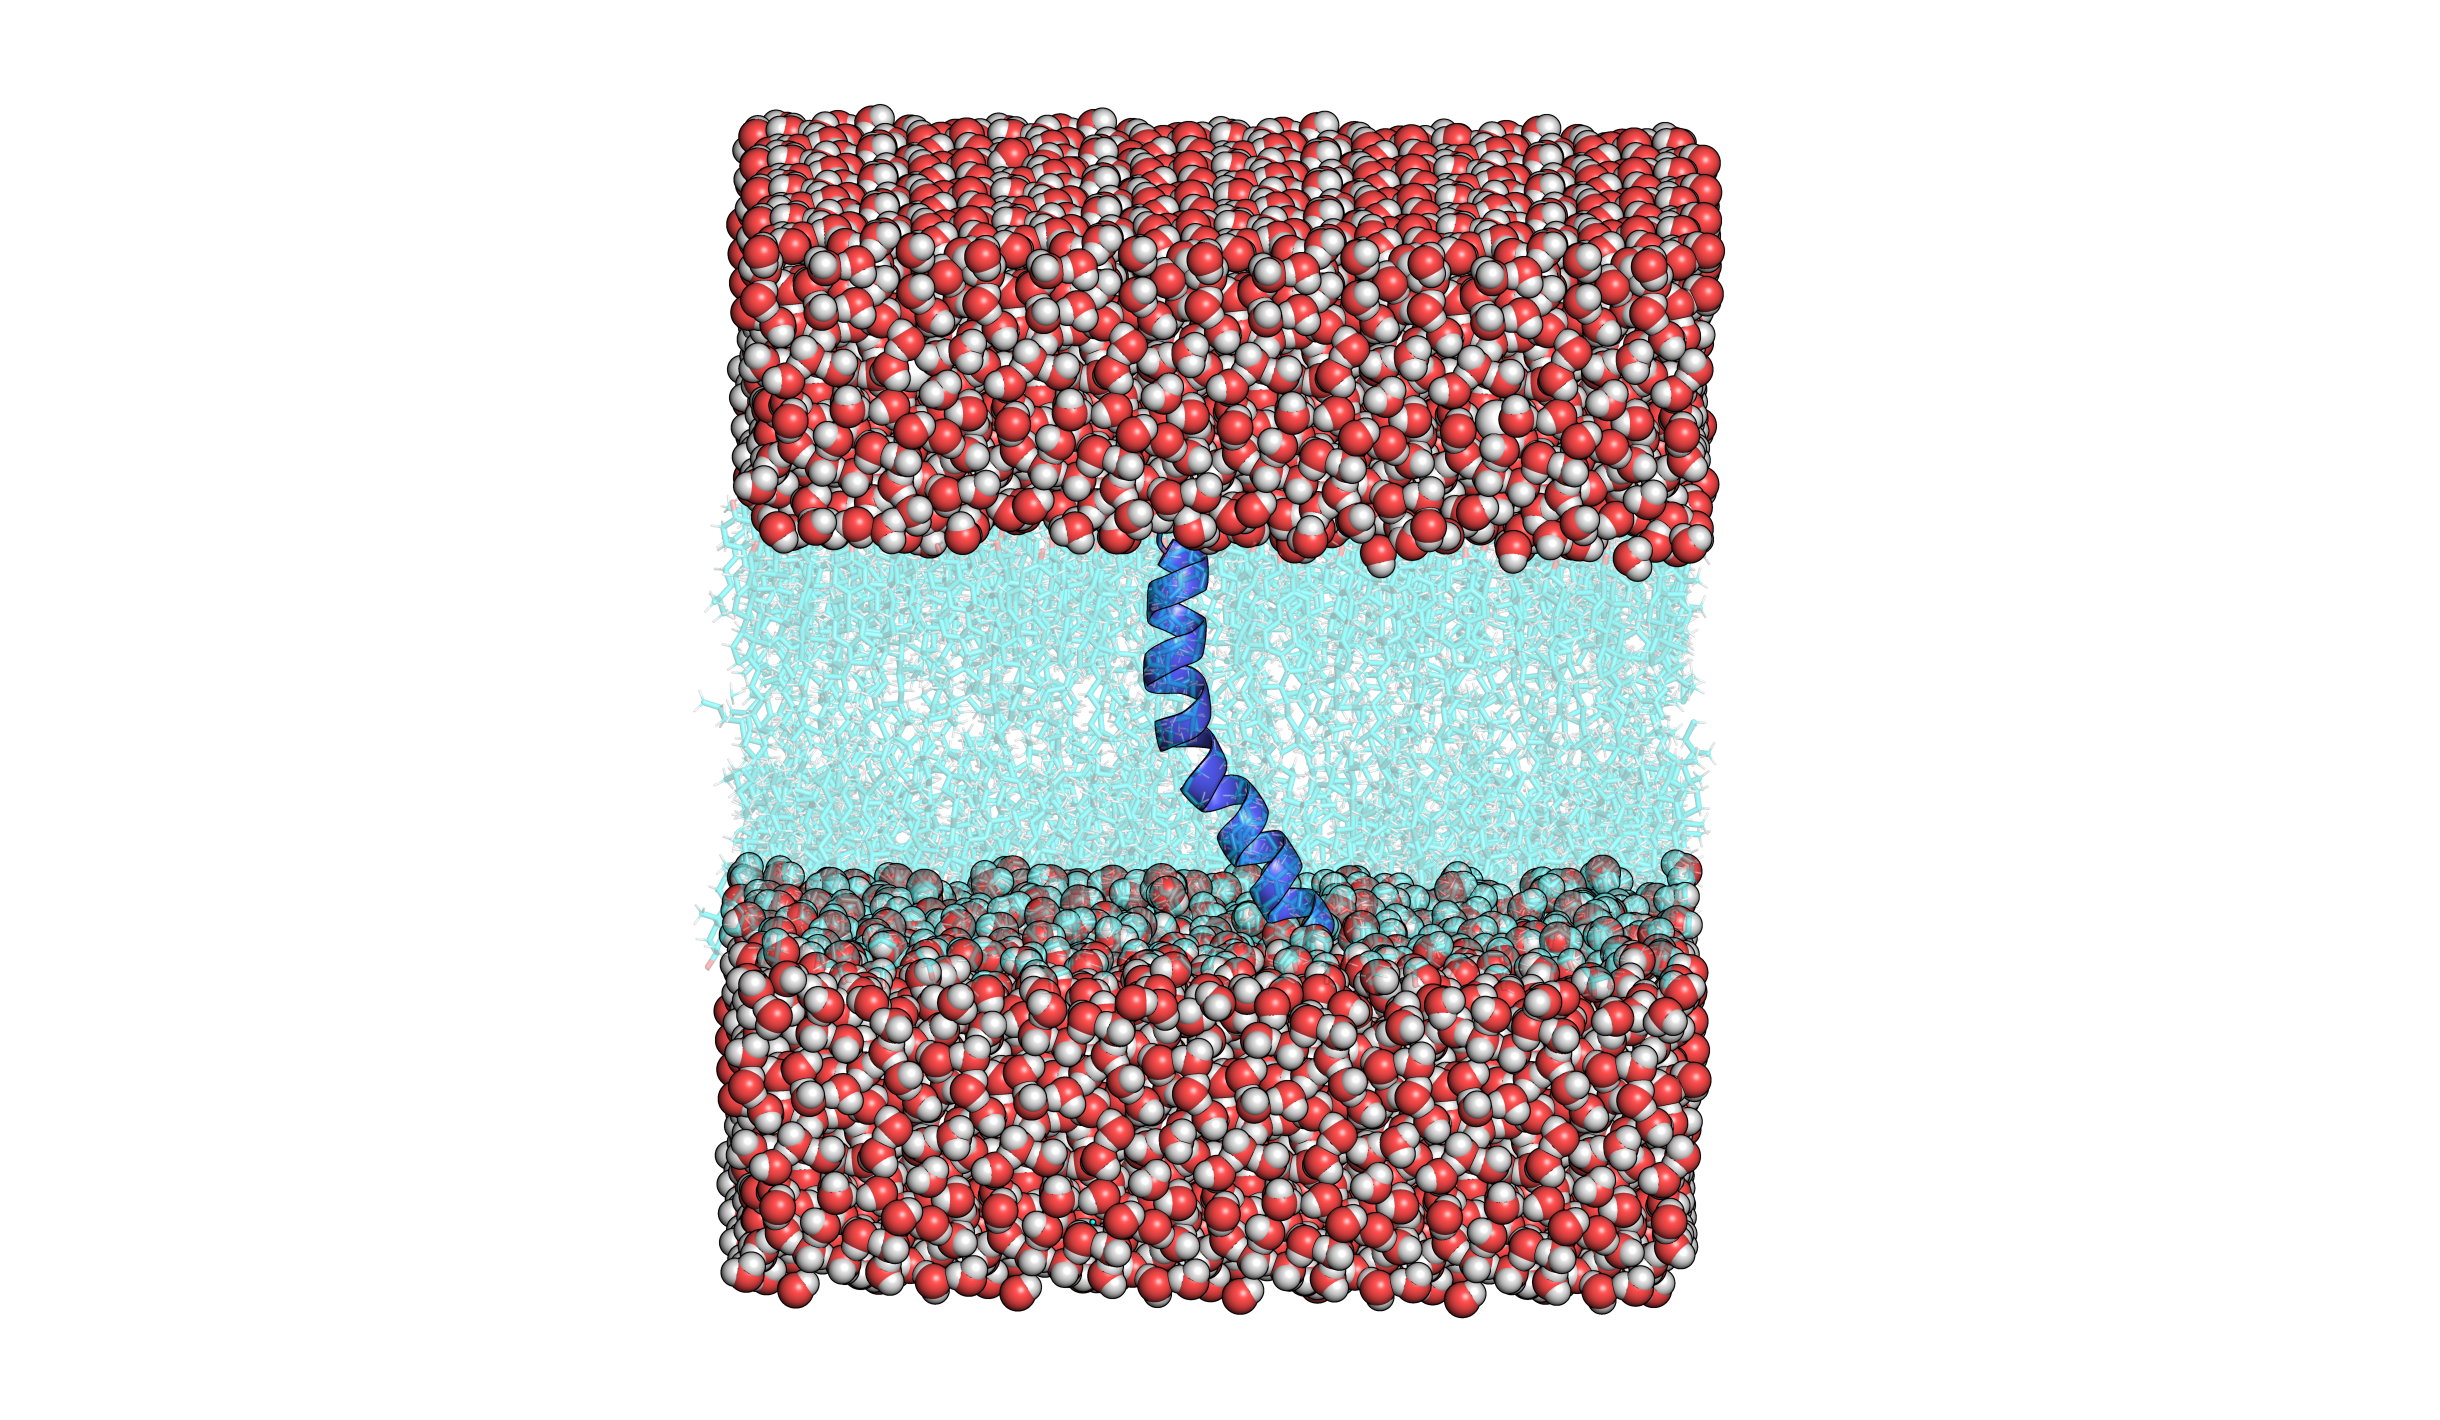 Pymol visualization of a protein embedded in cholesterol membrane